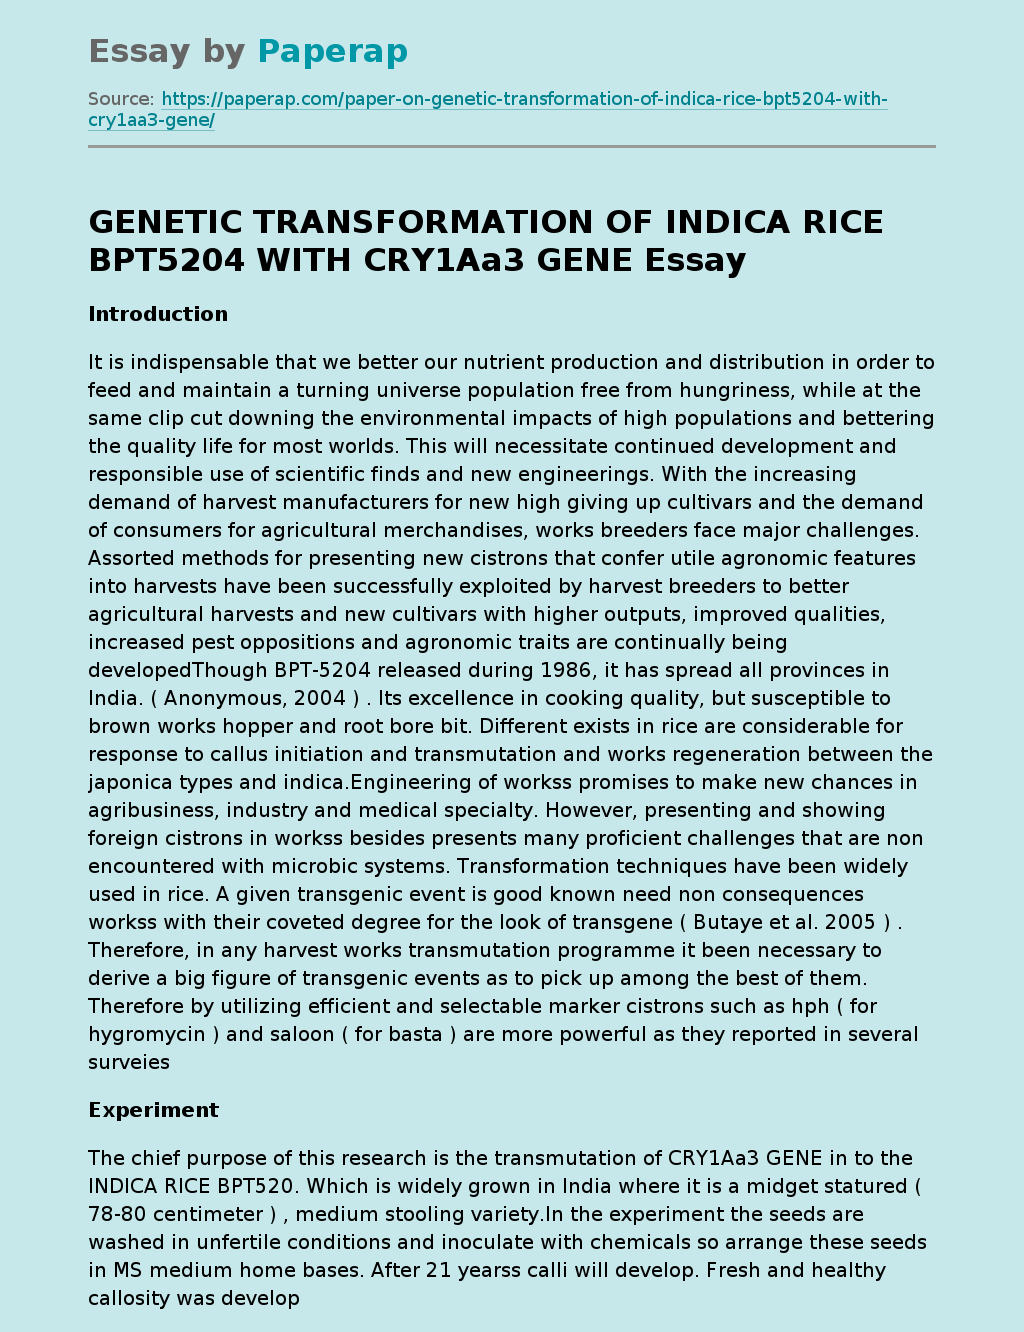 GENETIC TRANSFORMATION OF INDICA RICE BPT5204 WITH CRY1Aa3 GENE